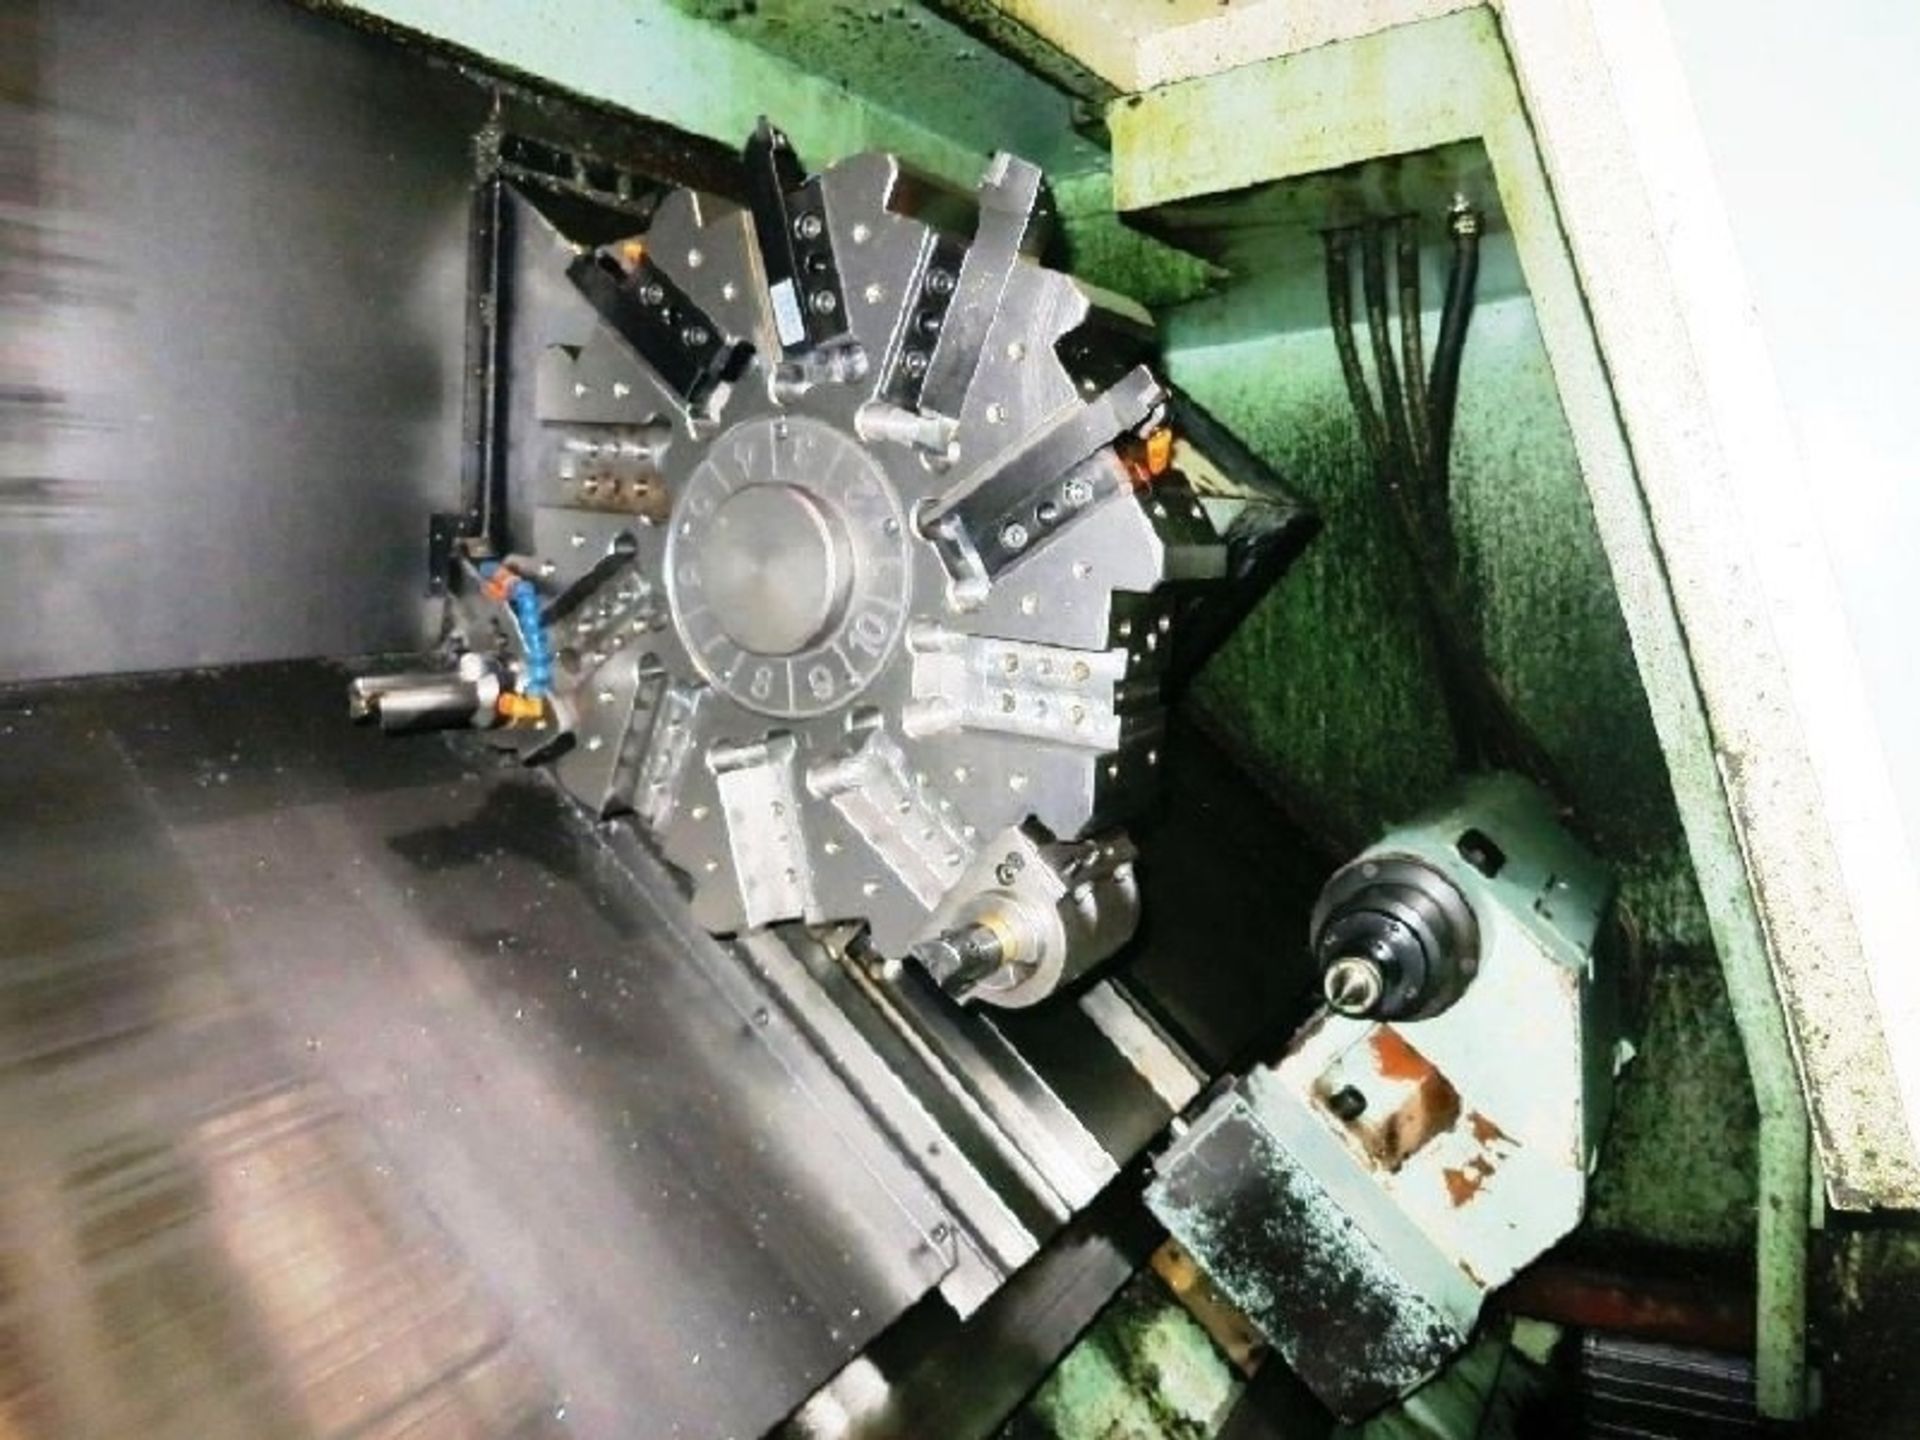 21.65" X 42.1" VICTOR (FORTUNE) MDL VTURN-36 2-AXIS CNC TURNING CENTER LATHE, S/N MD-1185, NEW - Image 4 of 10